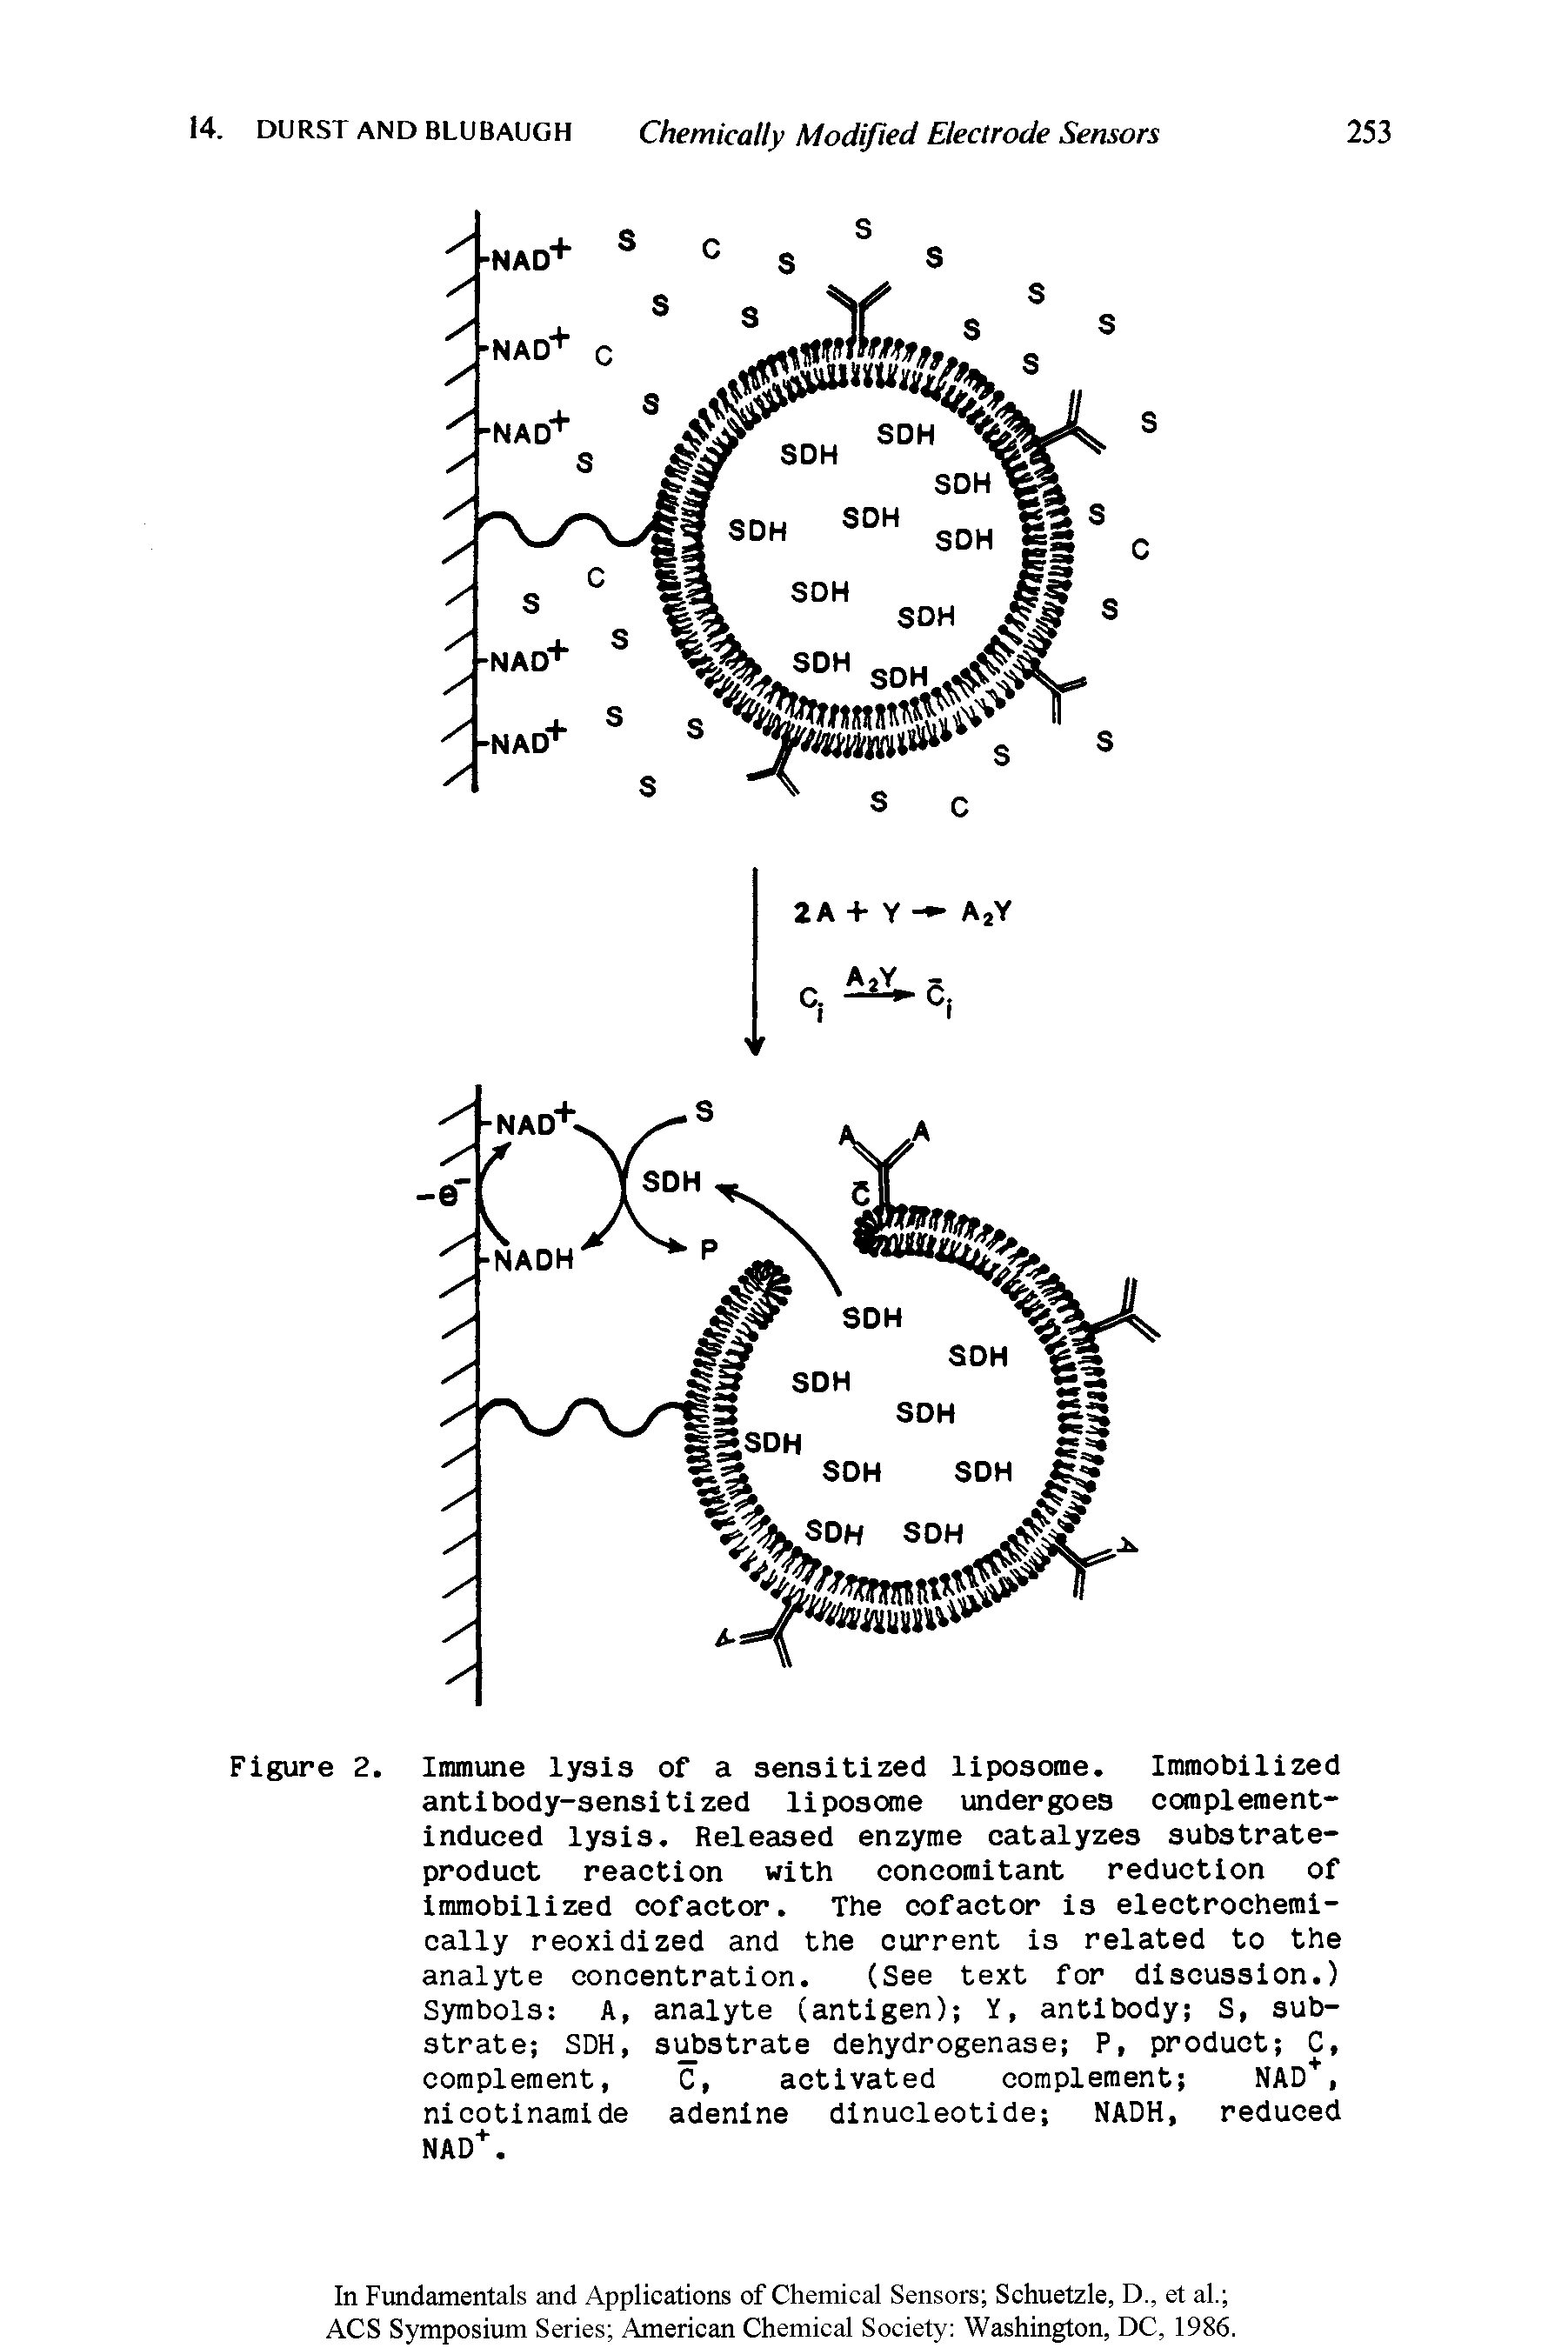 Figure 2. Immune lysis of a sensitized liposome. Immobilized antibody-sensitized liposome undergoes complement-induced lysis. Released enzyme catalyzes substrate-product reaction with concomitant reduction of immobilized cofactor. The cofactor is electrochemi-cally reoxidized and the current is related to the analyte concentration. (See text for discussion.) Symbols A, analyte (antigen) Y, antibody S, sub-...